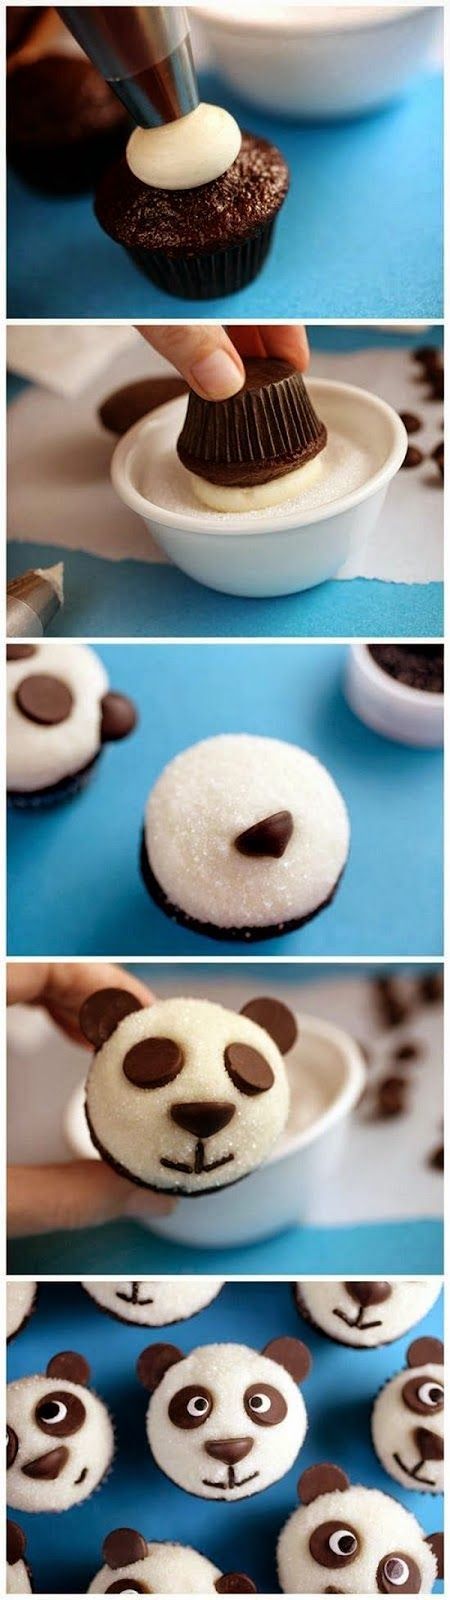 EASY LITTLE PANDAS CHOCOLATE CUPCAKES – i should try this with the orange chocolate